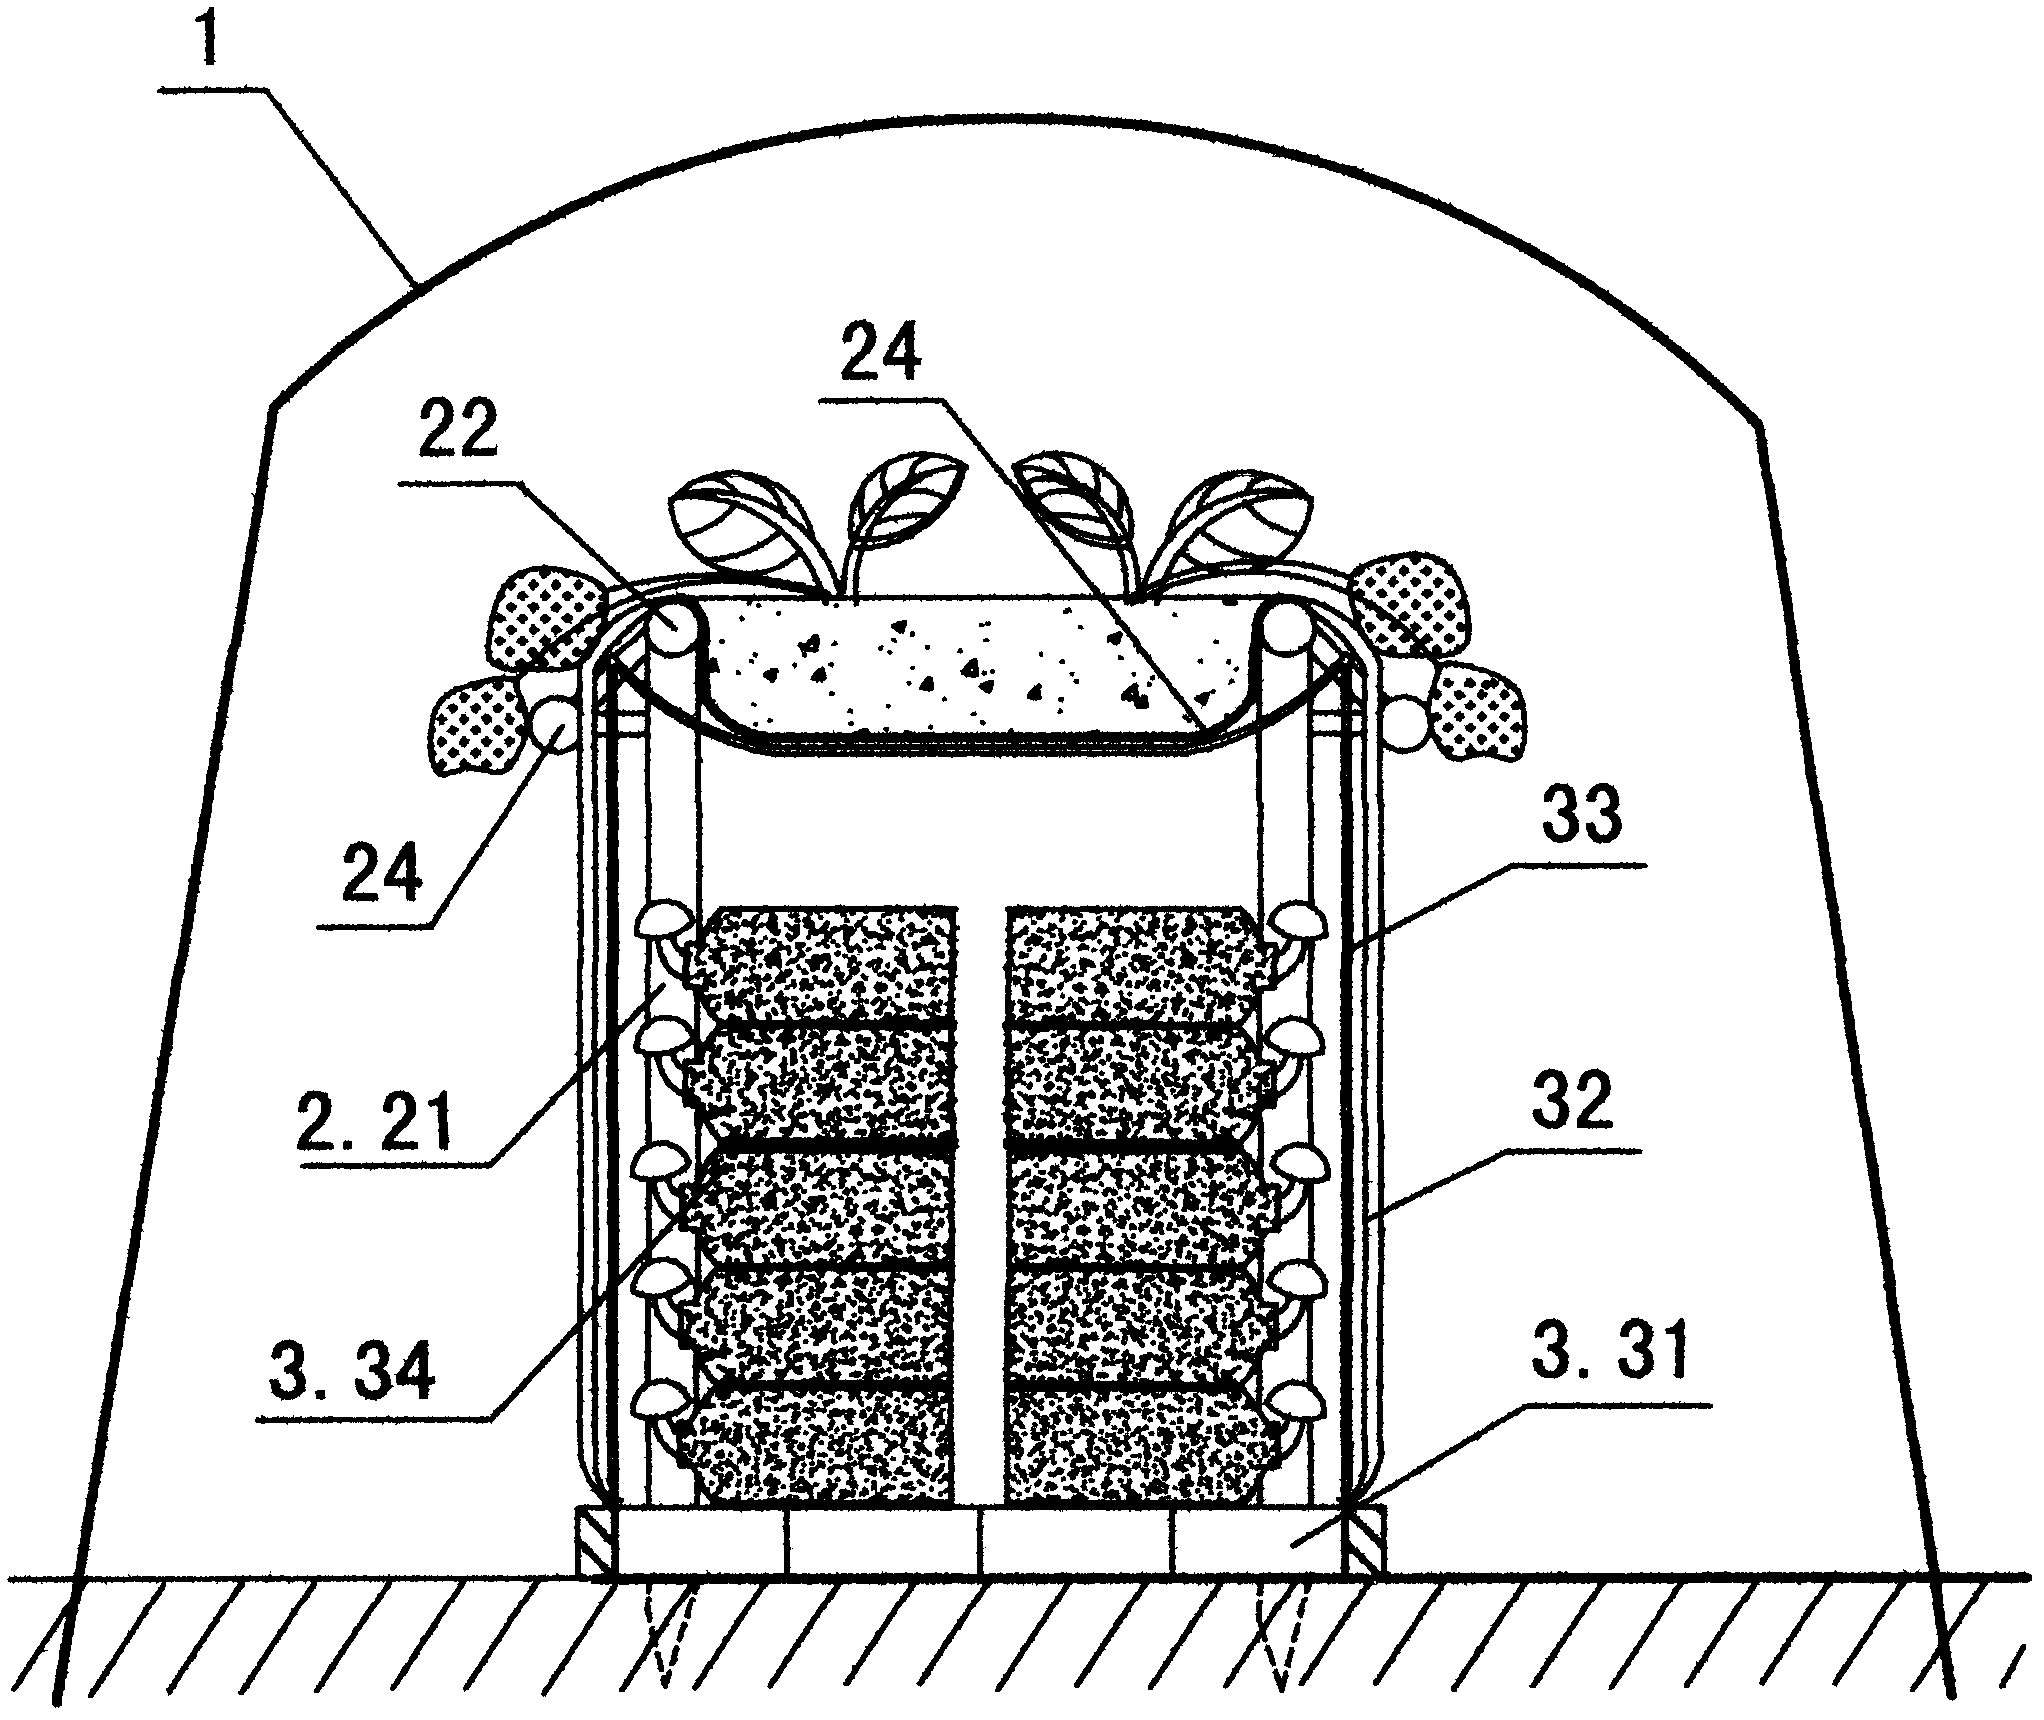 Dedicated device and method for composite cultivation of strawberries and edible mushrooms